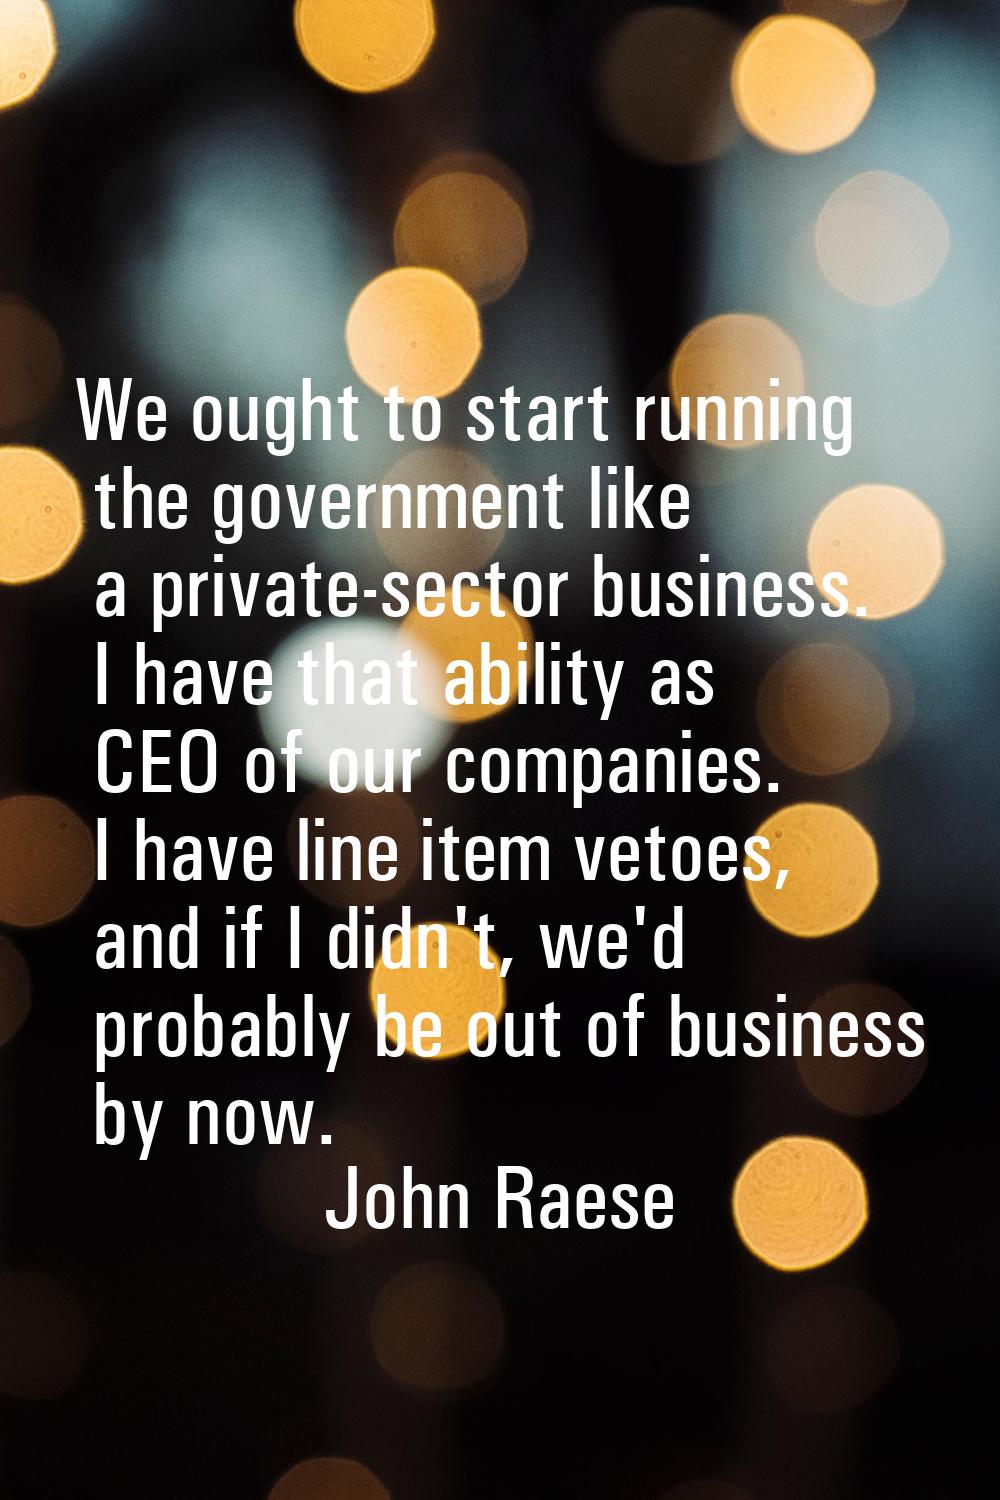 We ought to start running the government like a private-sector business. I have that ability as CEO